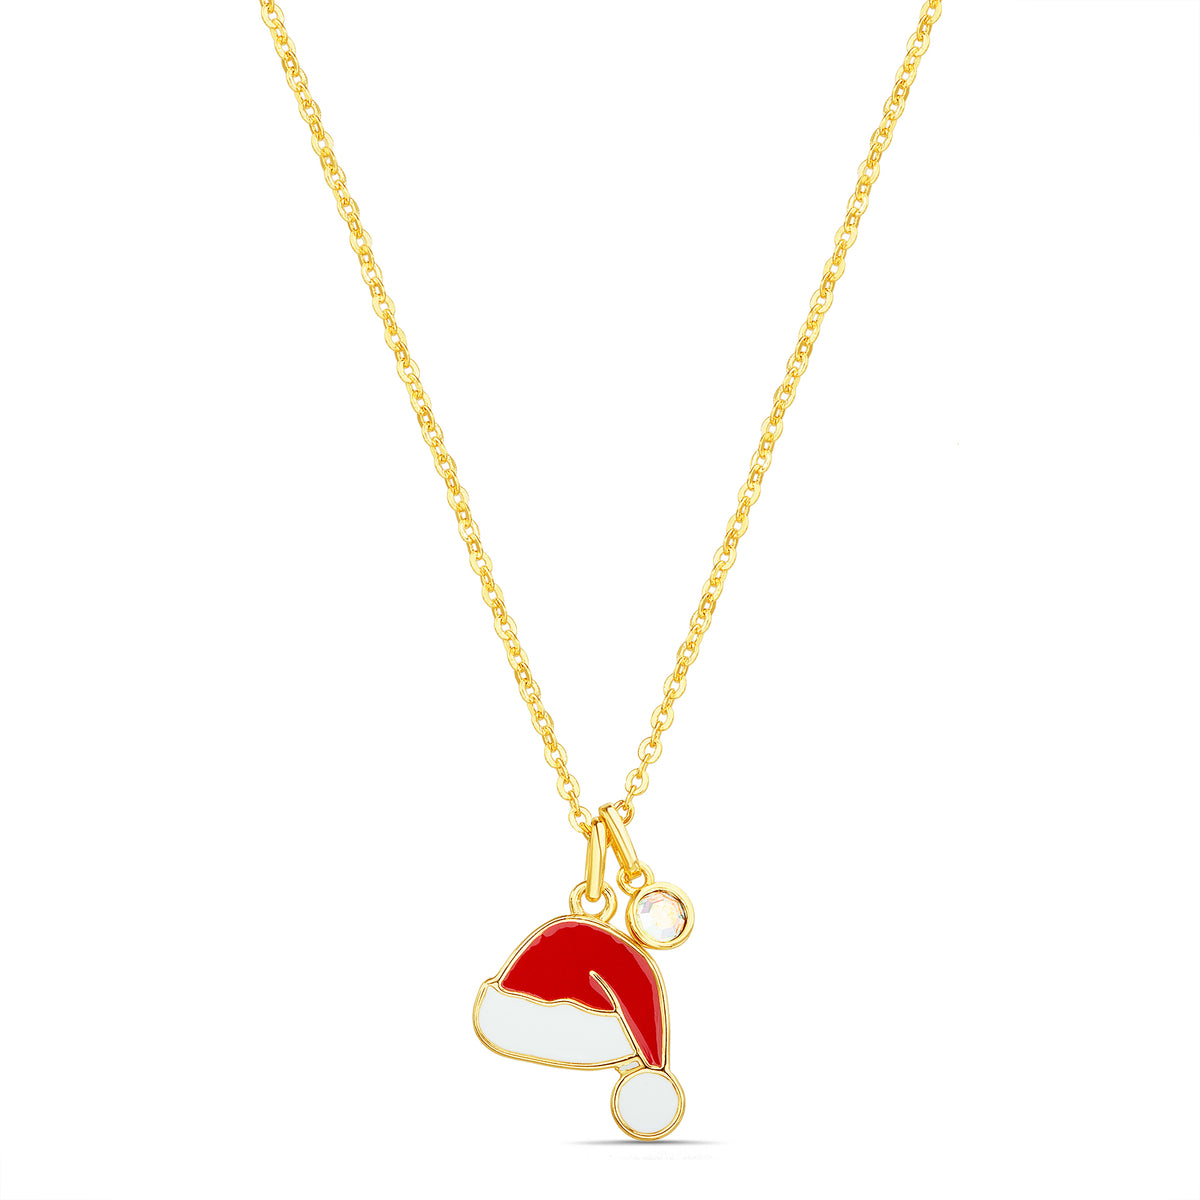 Jeulia Christmas Jingle Bells Necklace in Yellow Gold Tone | Sterling  silver necklaces, Jewelry trends, Pearl jewels